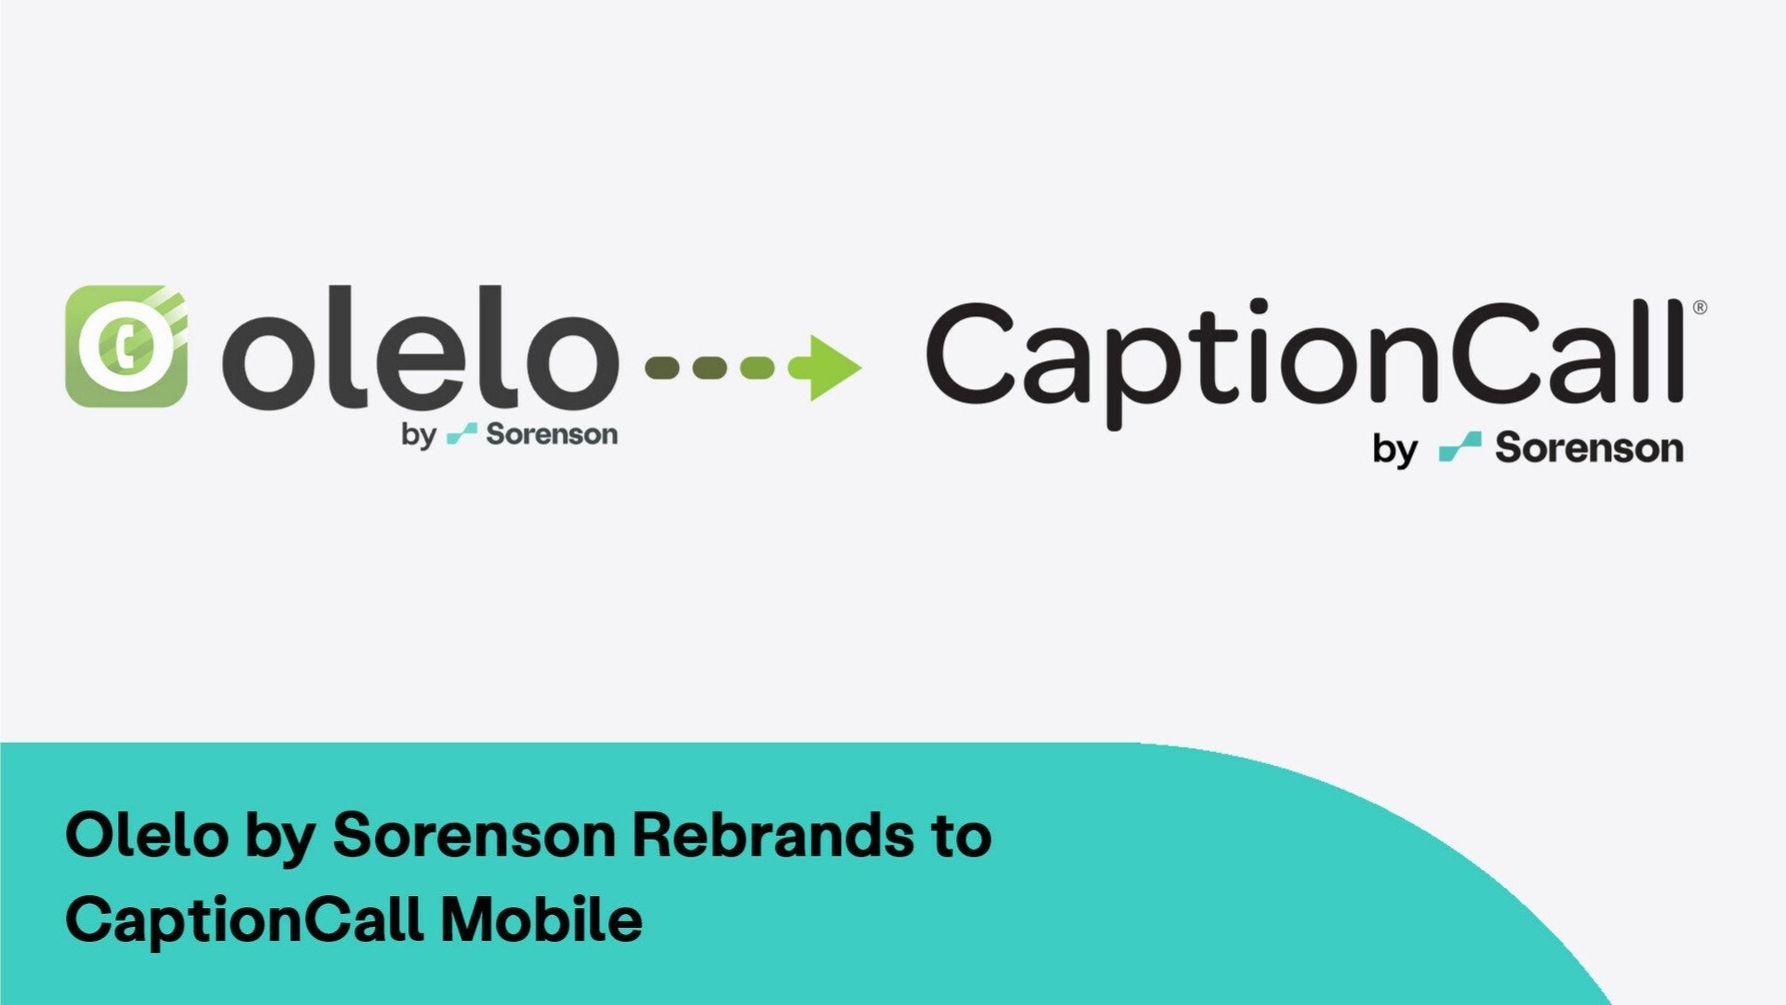 A white graphic with “OLELO by Sorenson” logo on the left with an arrow pointing to “CaptionCall by Sorenson” logo on the right. Below those is a curved teal bar coming from the lower left corner with “Olelo by Sorenson Rebrands to CaptionCall Mobile” in black text.